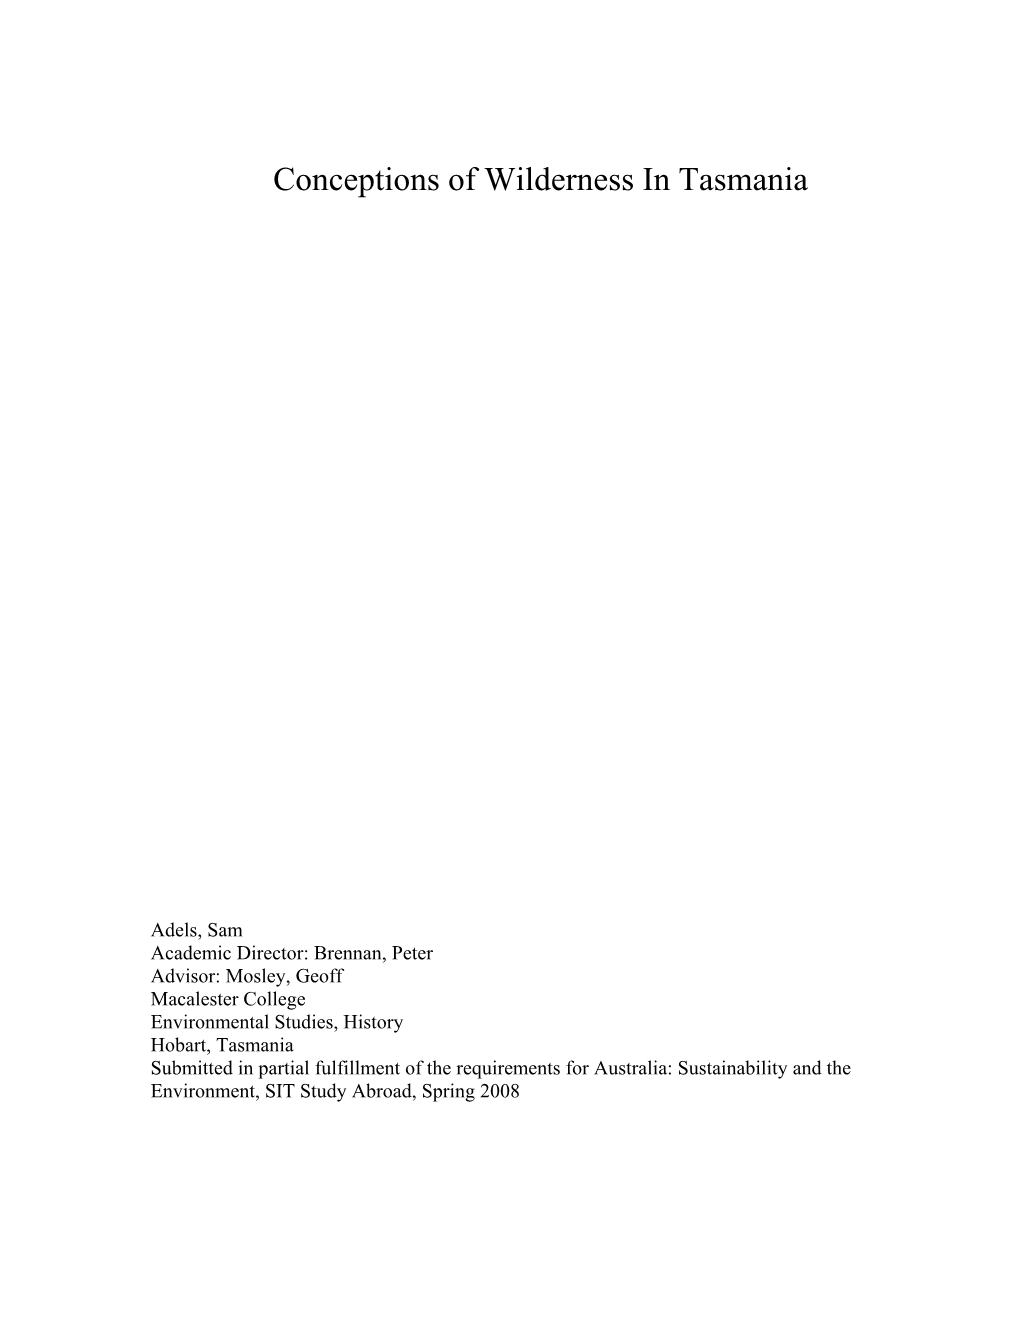 Conceptions of Wilderness in Tasmania